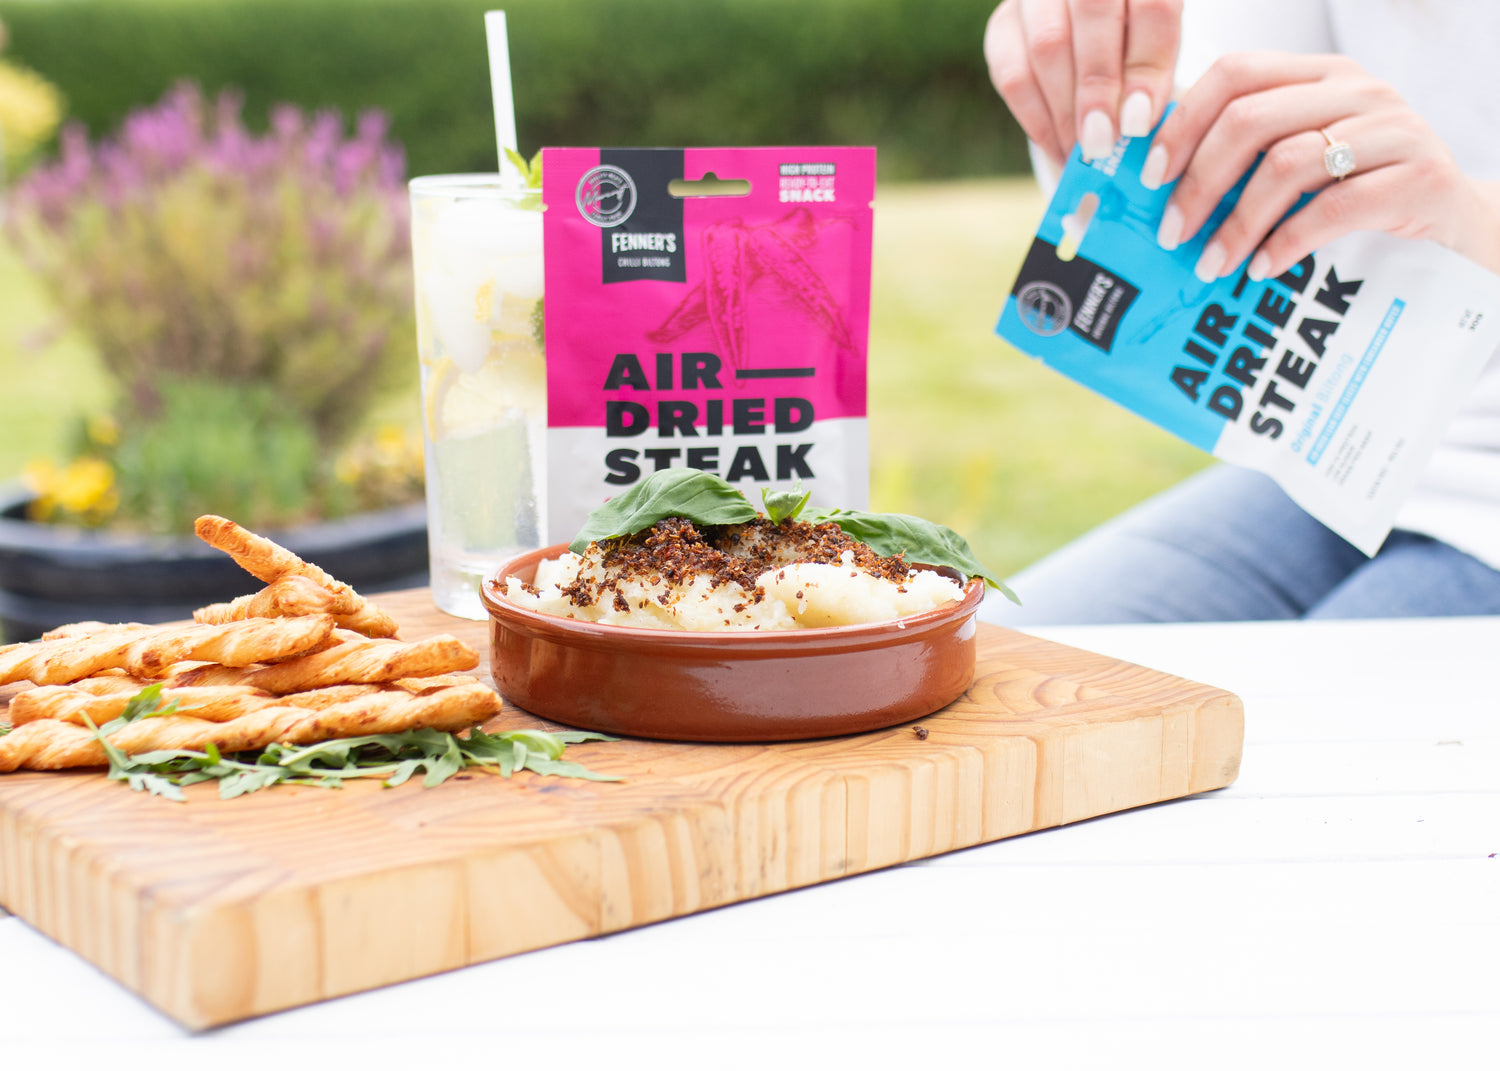 An outdoor snack setup featuring air-dried steak snacks from Fenner's, with a person's hand holding a blue packet on the right and a pink packet standing on the wooden serving board. The board also holds a bowl of mashed potatoes topped with herbs, a stack of twisted breadsticks, and a refreshing drink with a straw, all against a garden background with blooming lavender